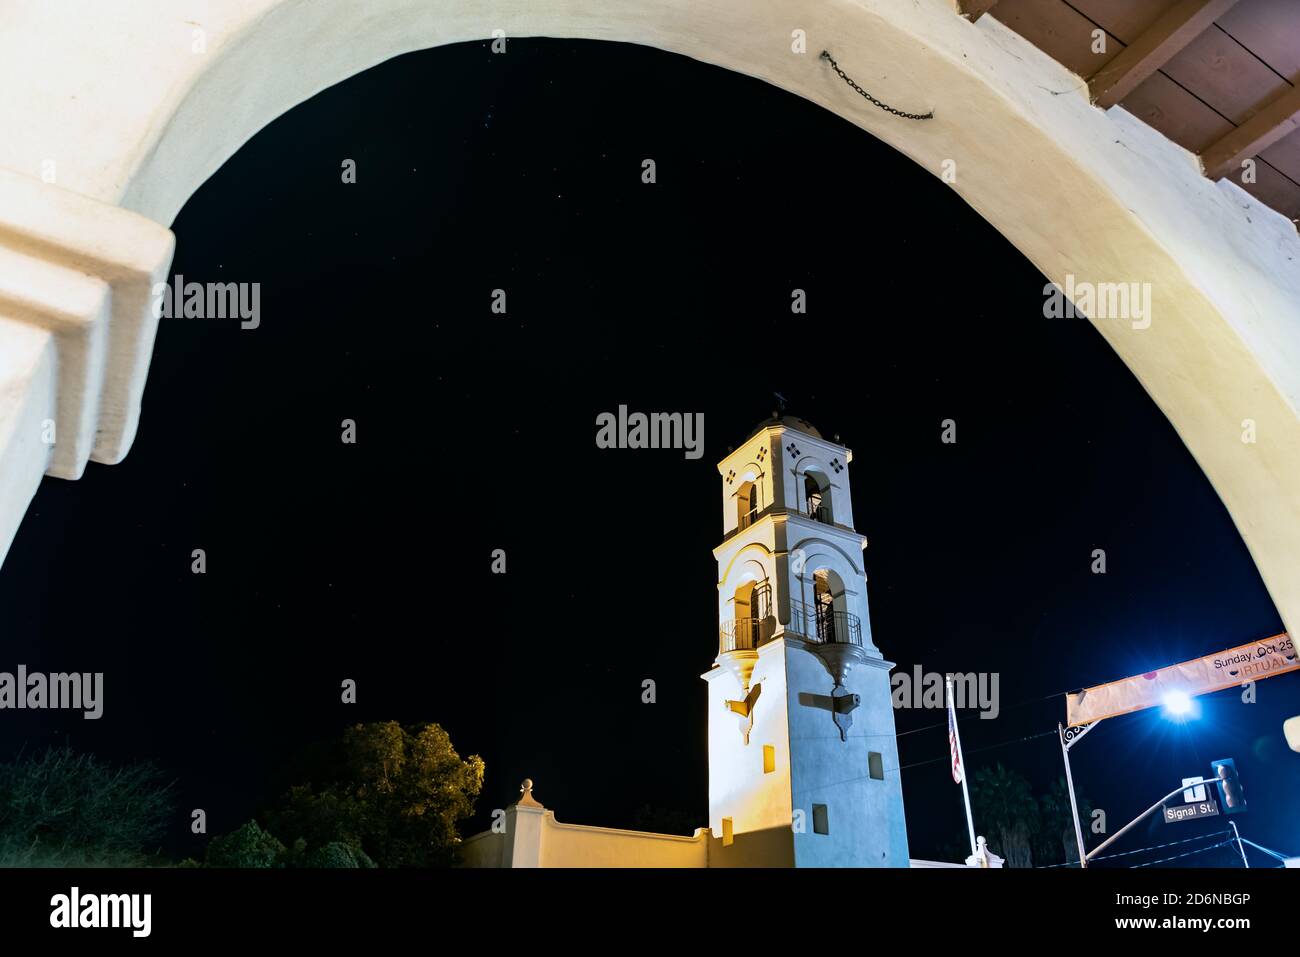 Architectural arch frames the Ojai tower against the night sky twinkling with constellation stars. Stock Photo